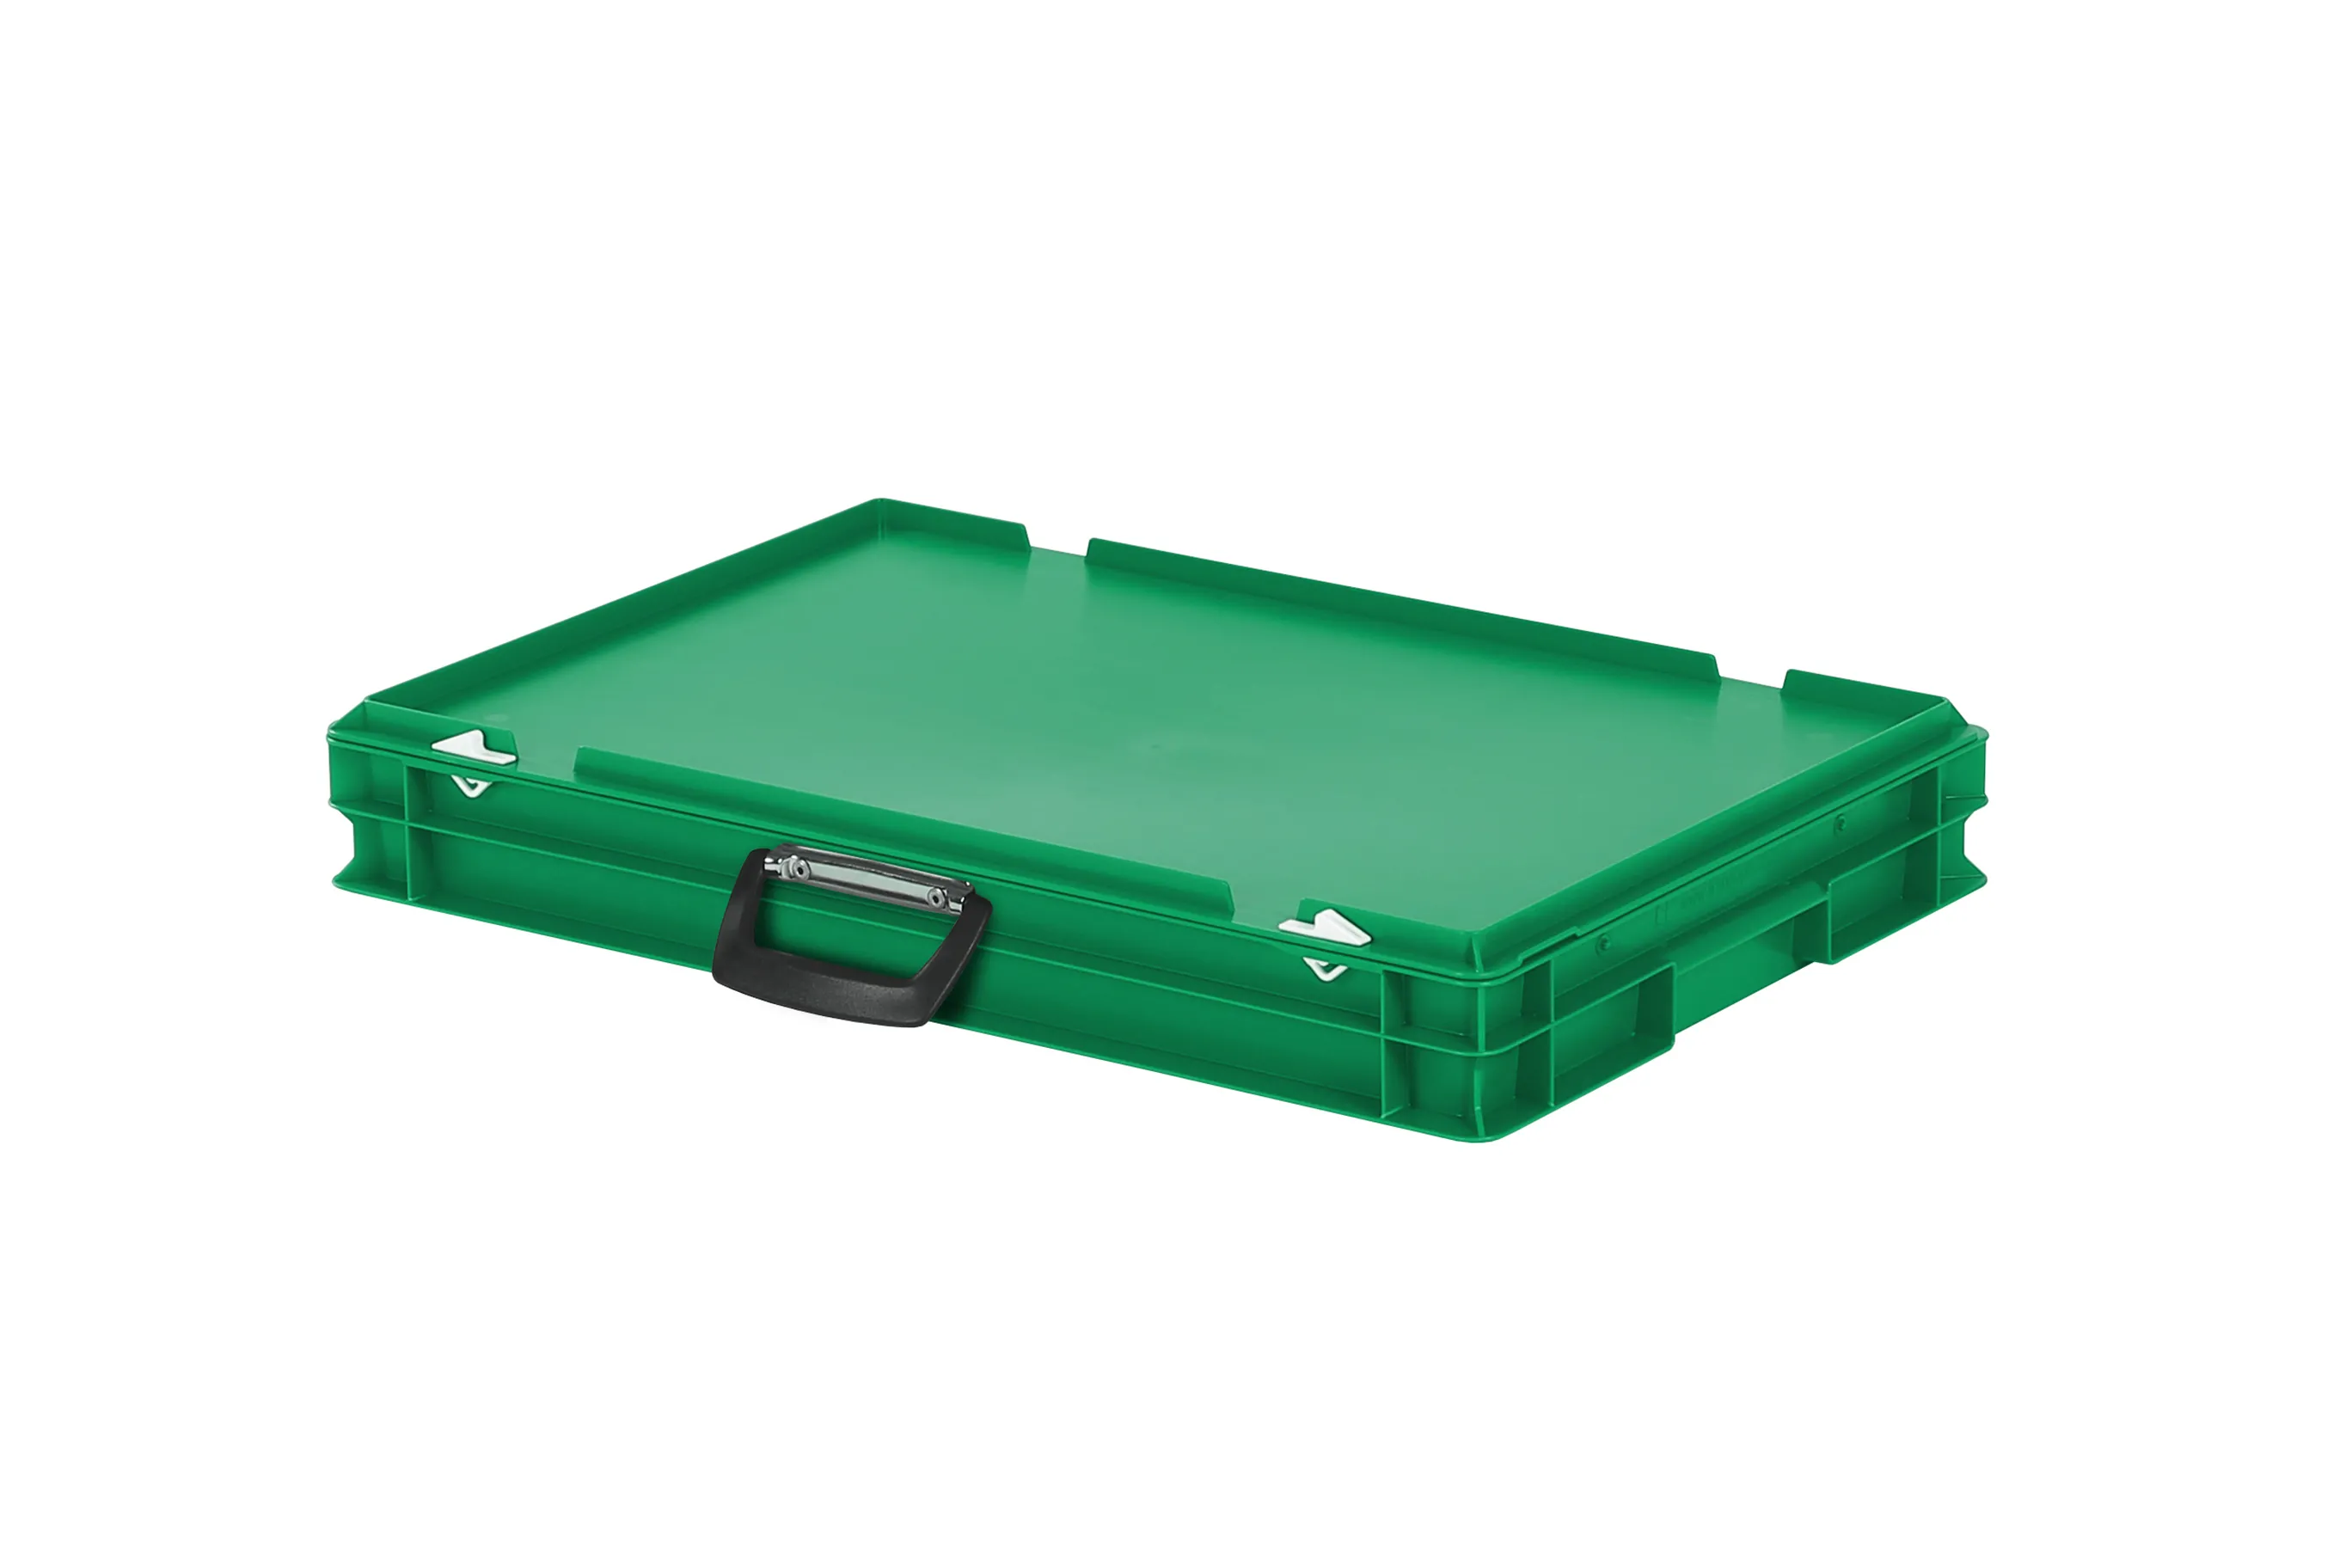 Plastic case - 600 x 400 x H 90 mm - Green - Stacking bin with lid and case handle